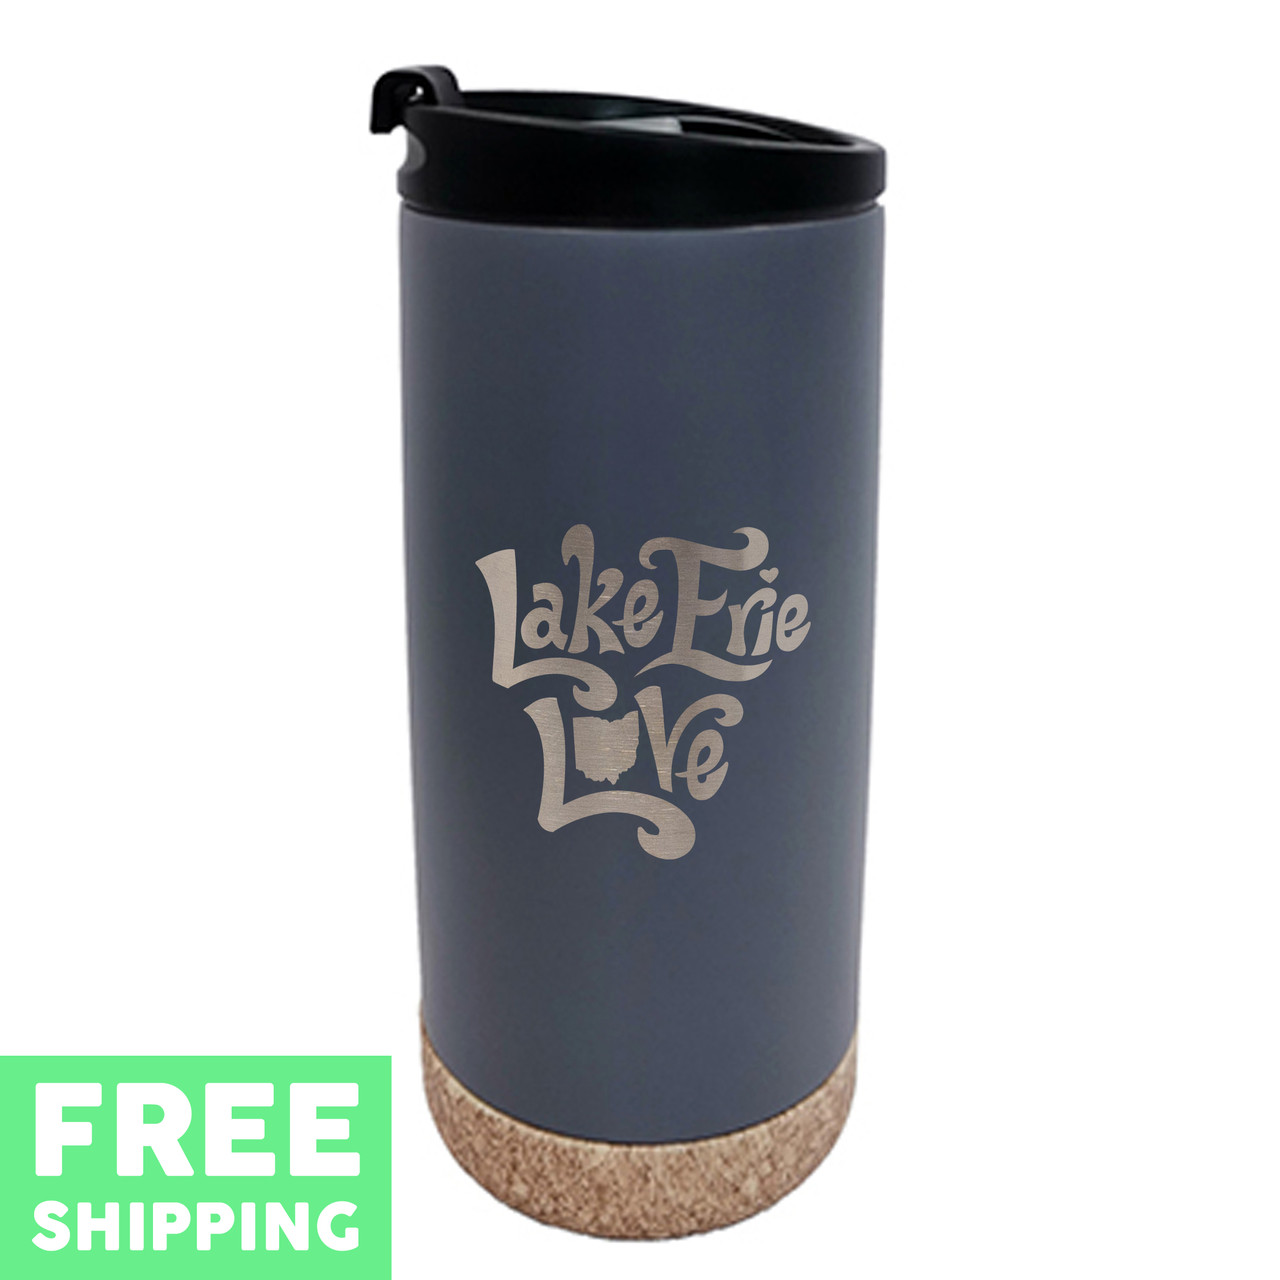 https://cdn11.bigcommerce.com/s-pza6oiin/images/stencil/1280x1280/products/10141/18389/lakeerielove_16oz_stone_3783_freeshipping__39283.1614280184.jpg?c=2?imbypass=on